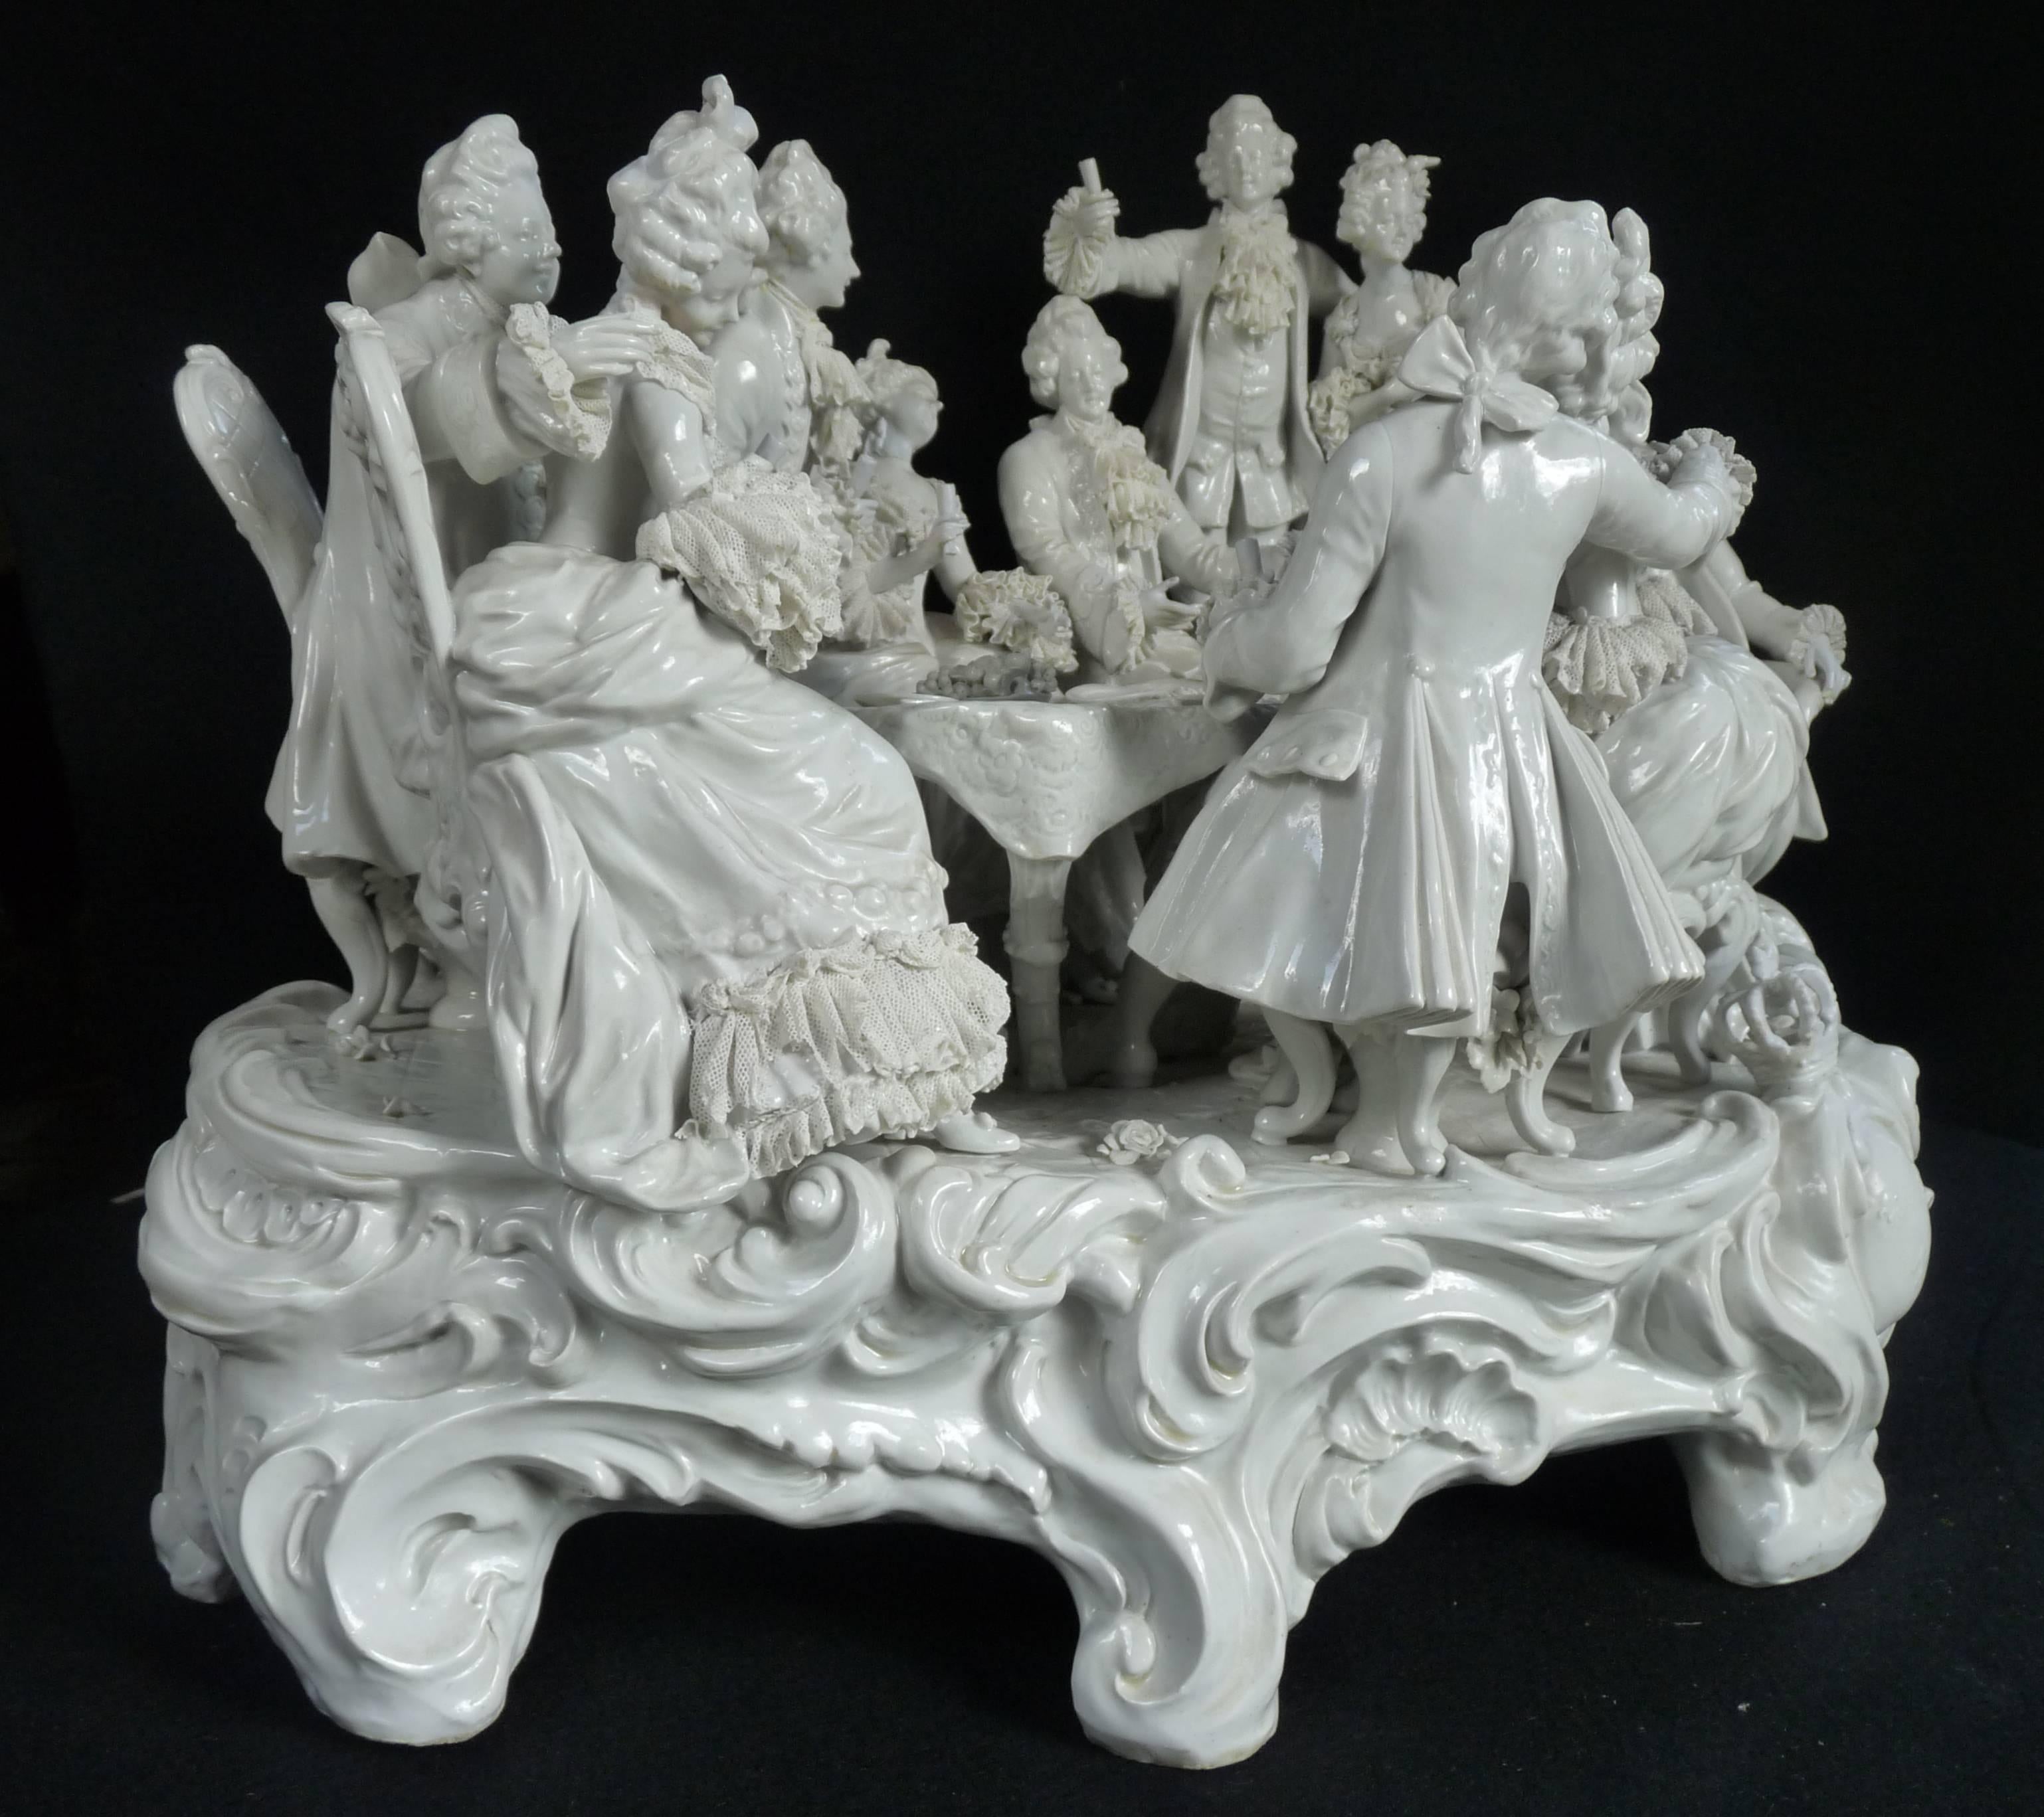 Blanc de Chine porcelain figural group of 18th century revelers around a banquet table. 
Porcelain bears the underglaze blue maker's mark of th Oldest Volkstedt factory, of Thuringia, Germany, 1760.

There are some factory-made repairs...On large